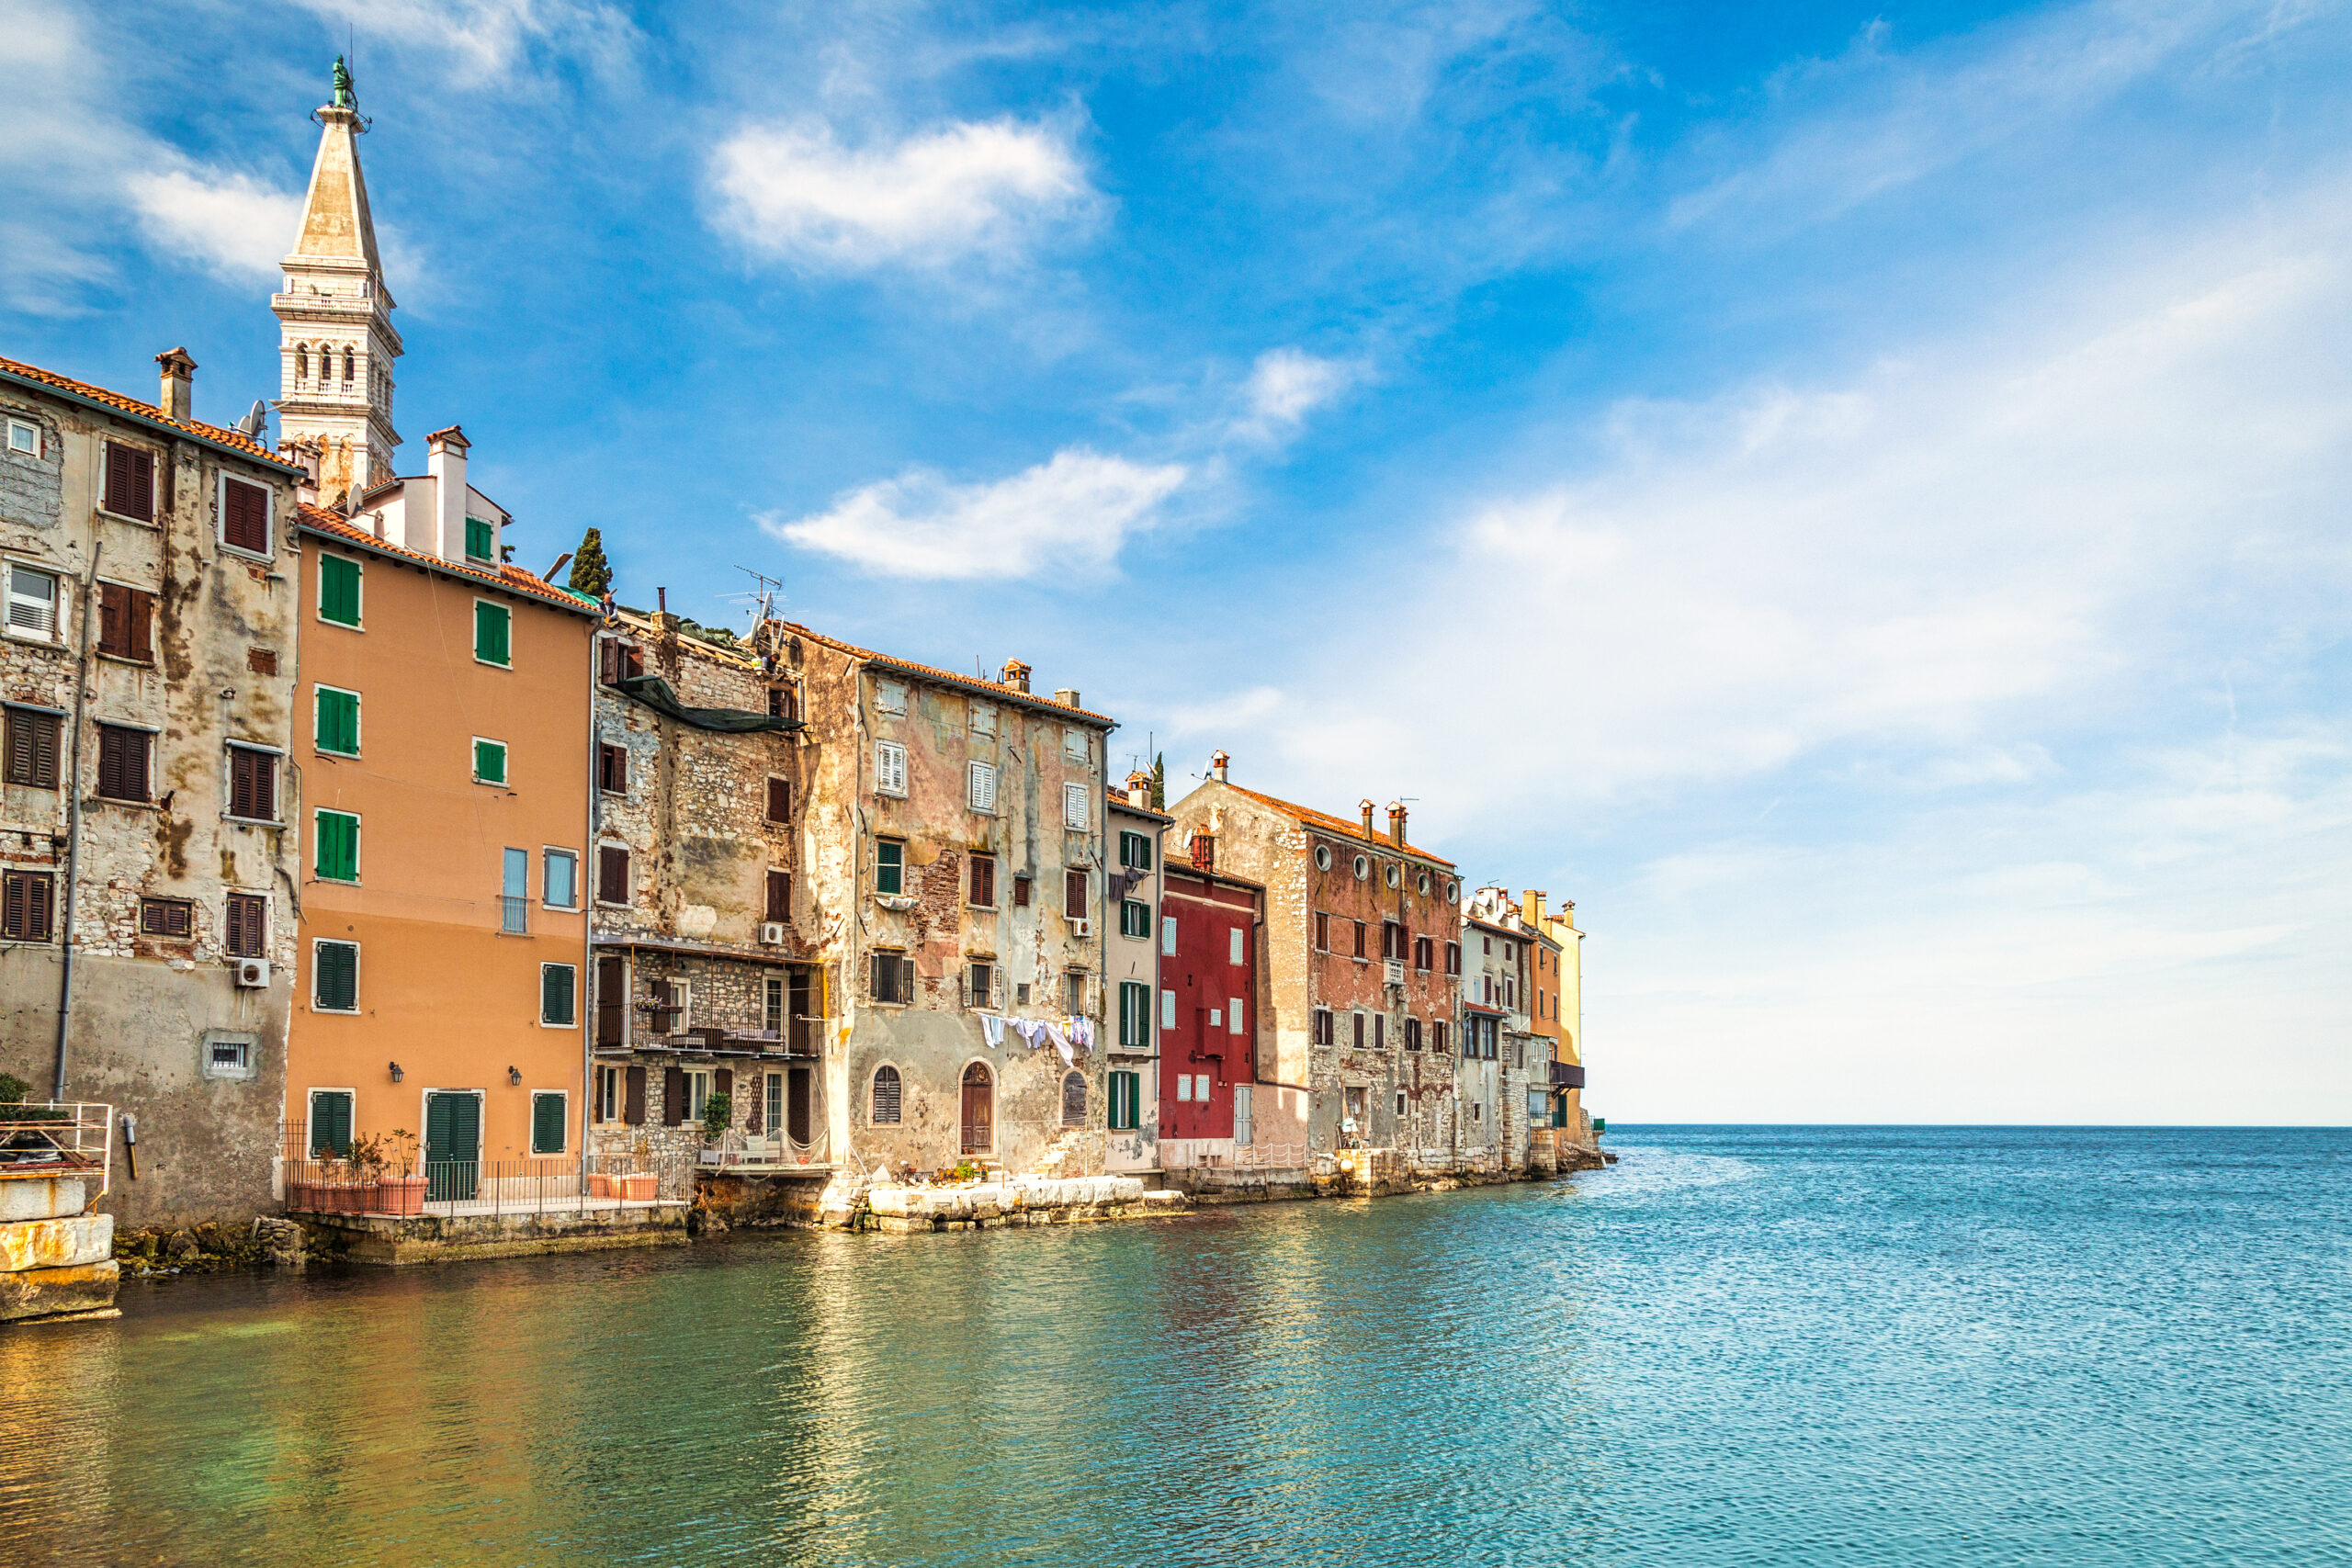 Town of Rovinj in Istria